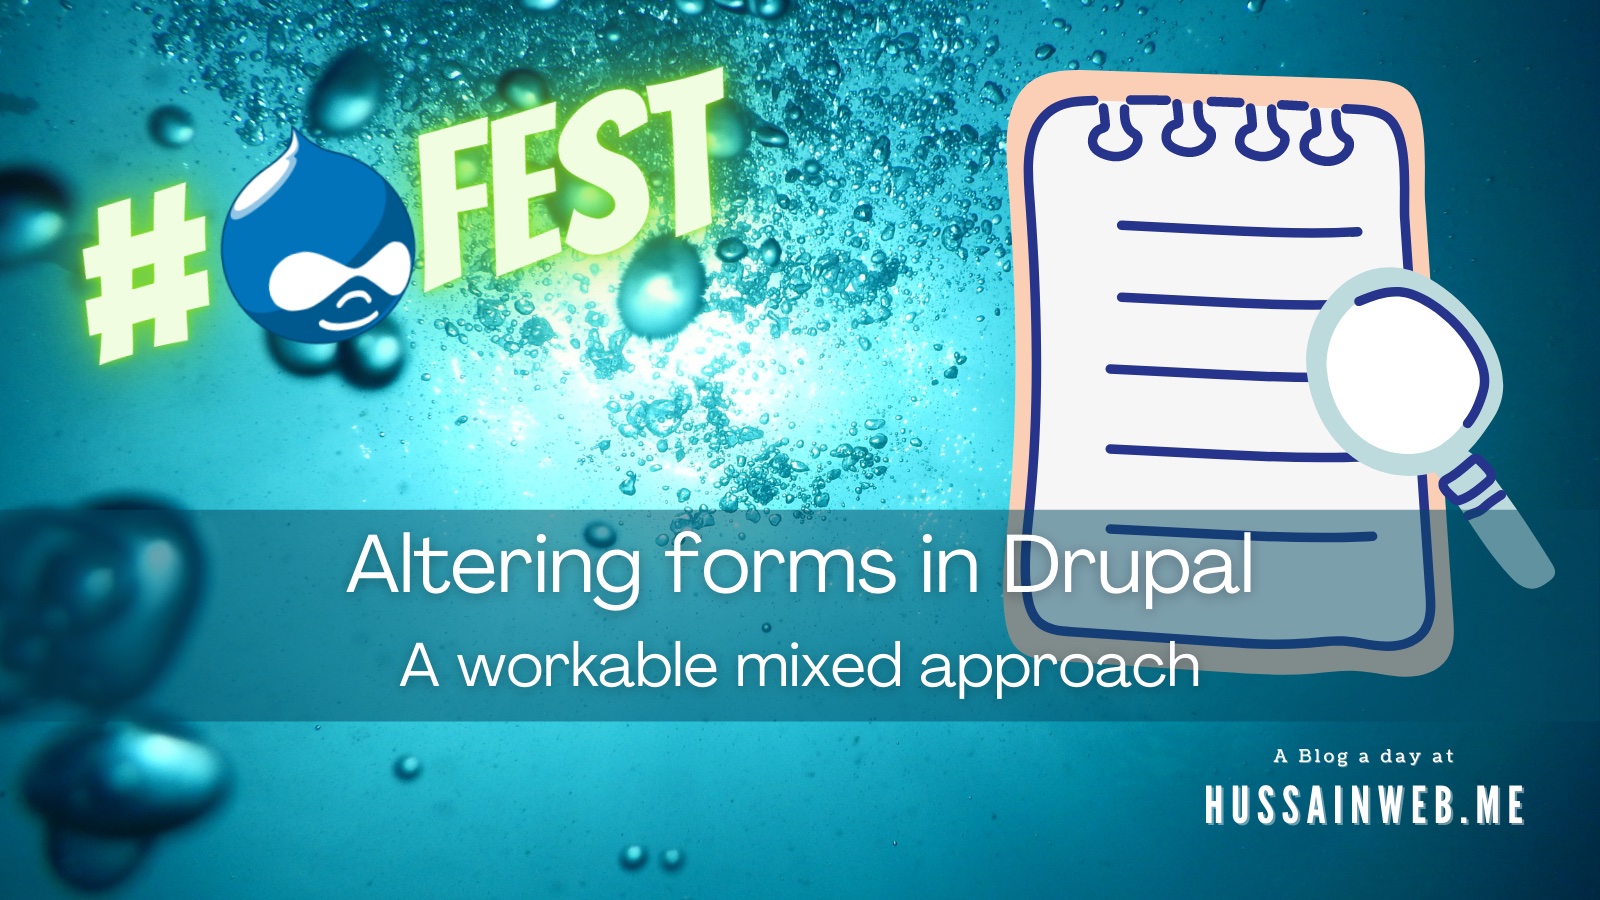 Altering forms in Drupal: a workable mixed approach